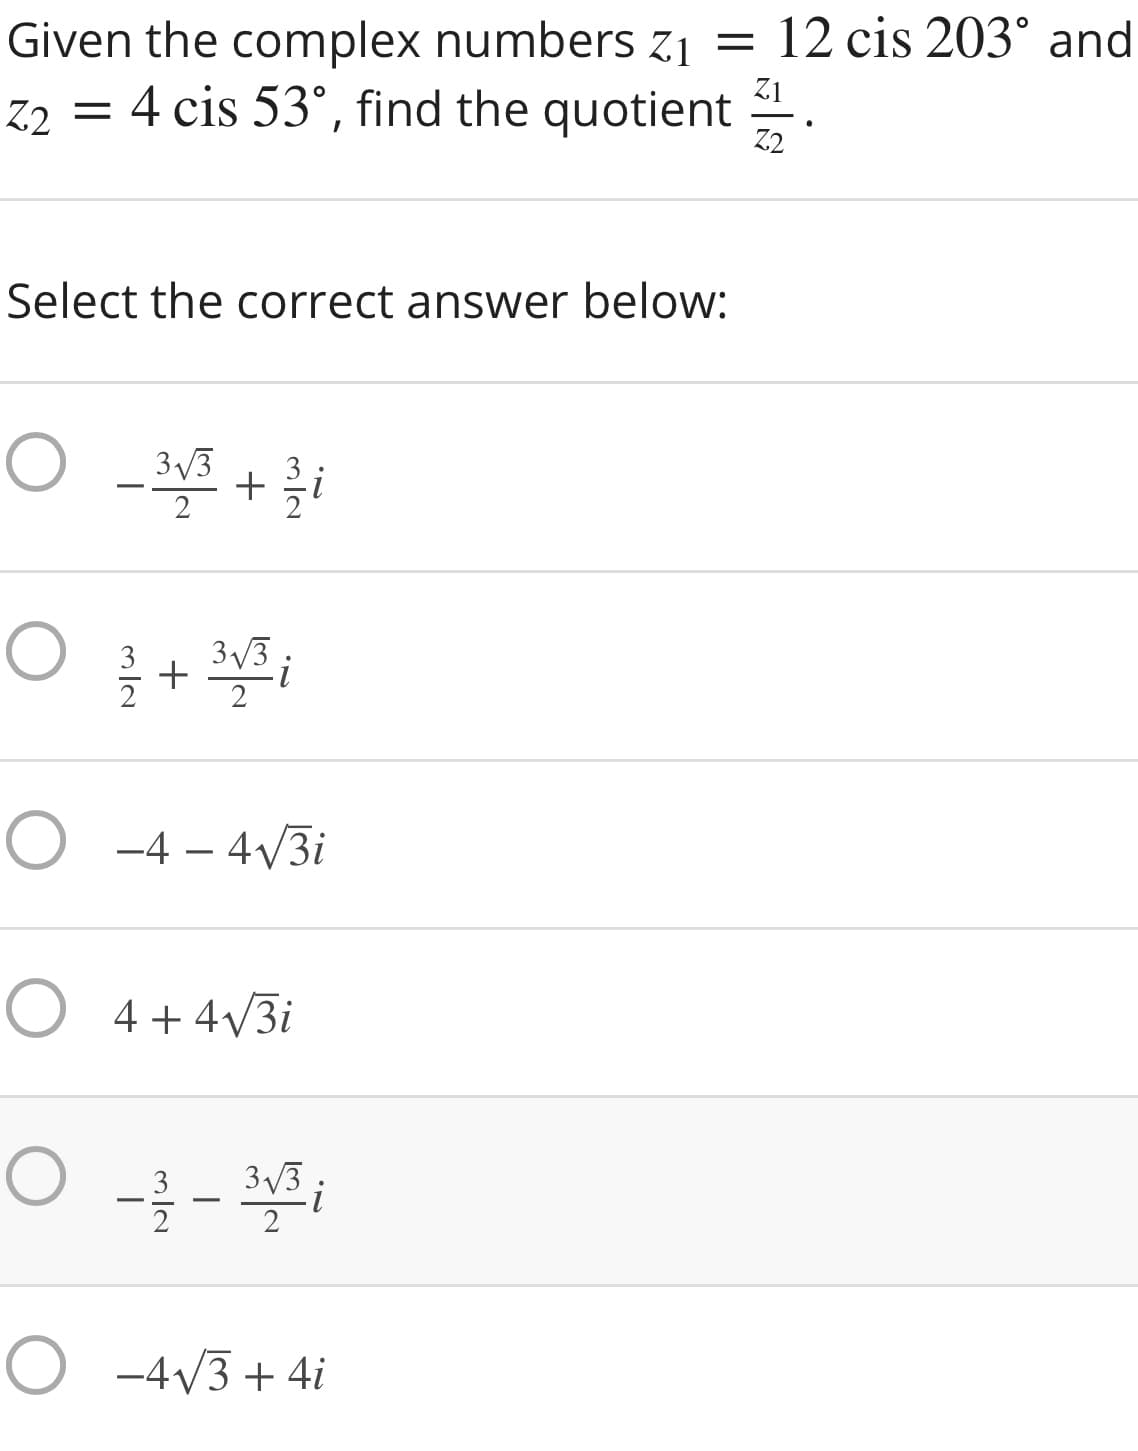 Given the complex numbers z1 = 12 cis 203° and
Z2 = 4 cis 53°, find the quotient
Z1
Z2
Select the correct answer below:
3/3
2
3/3
+
2
O -4 – 4/3i
O 4+ 4V3i
3/3
O -4V3 + 4i
